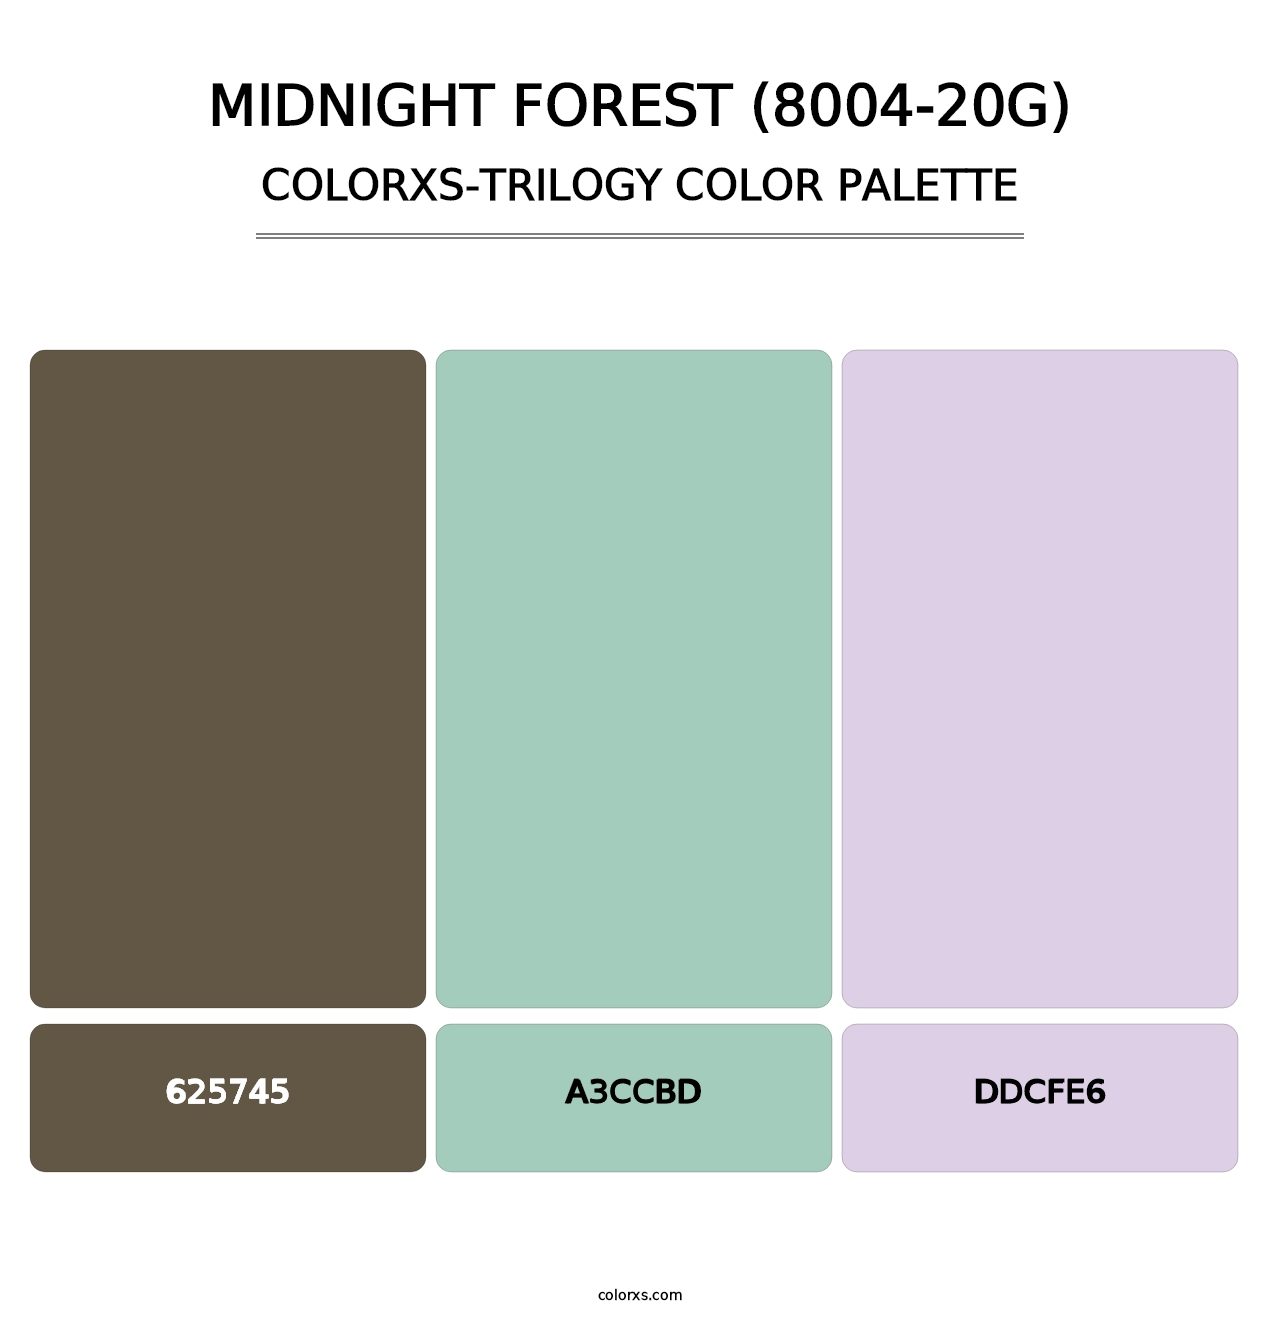 Midnight Forest (8004-20G) - Colorxs Trilogy Palette